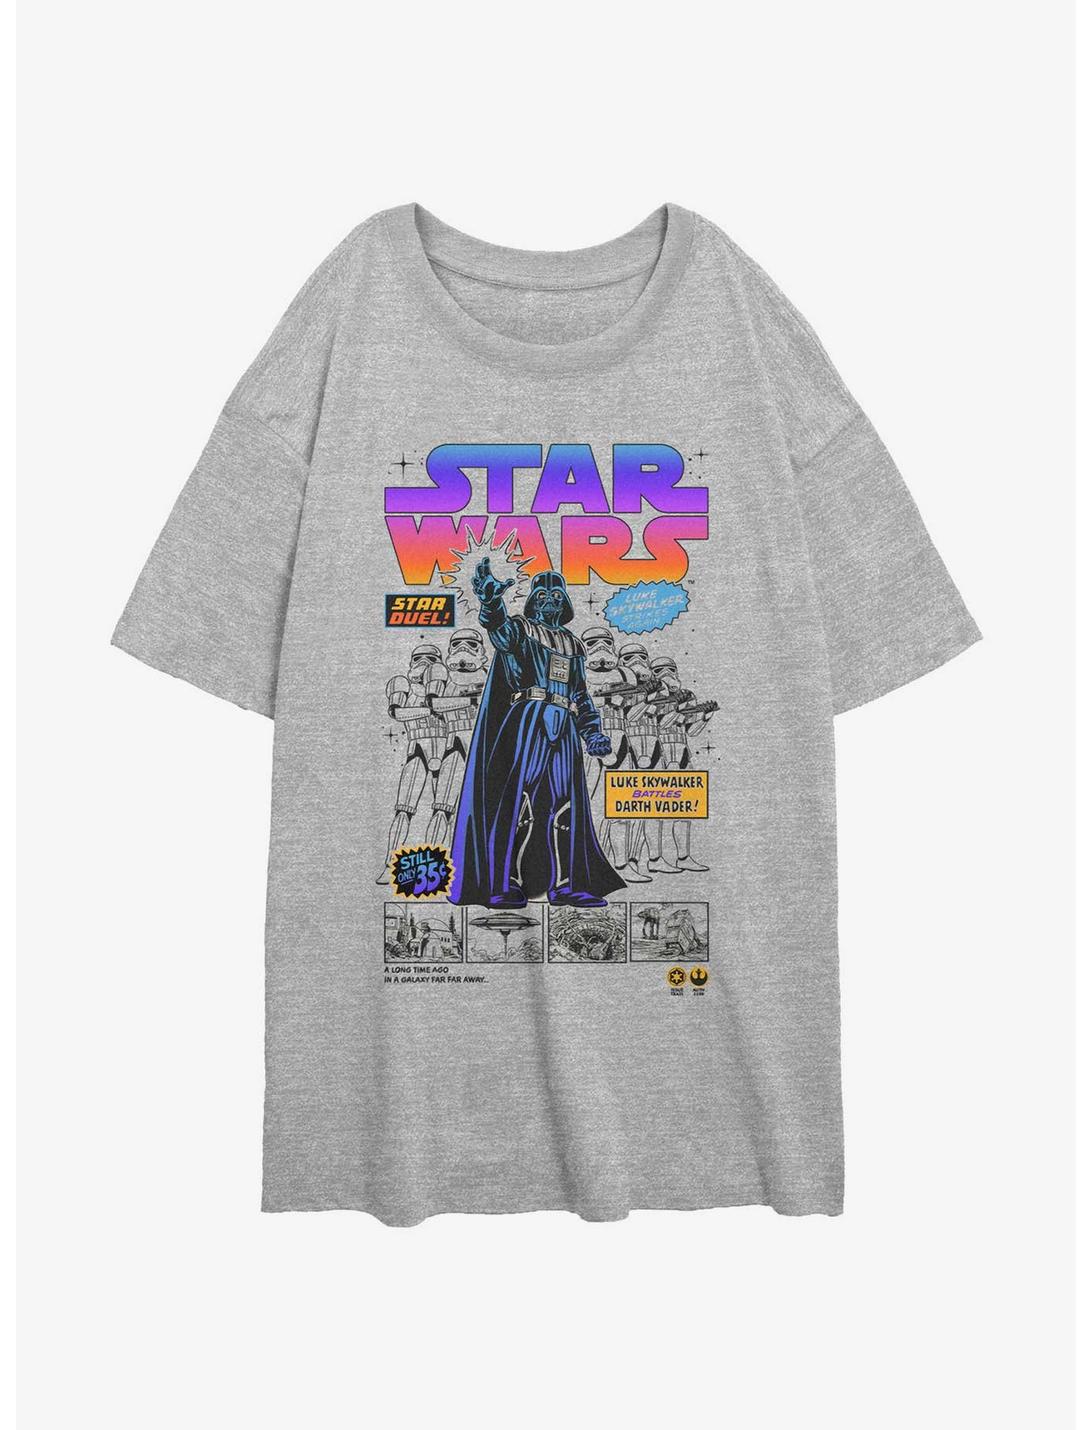 Star Wars Star Duel Comic Womens Oversized T-Shirt, ATH HTR, hi-res